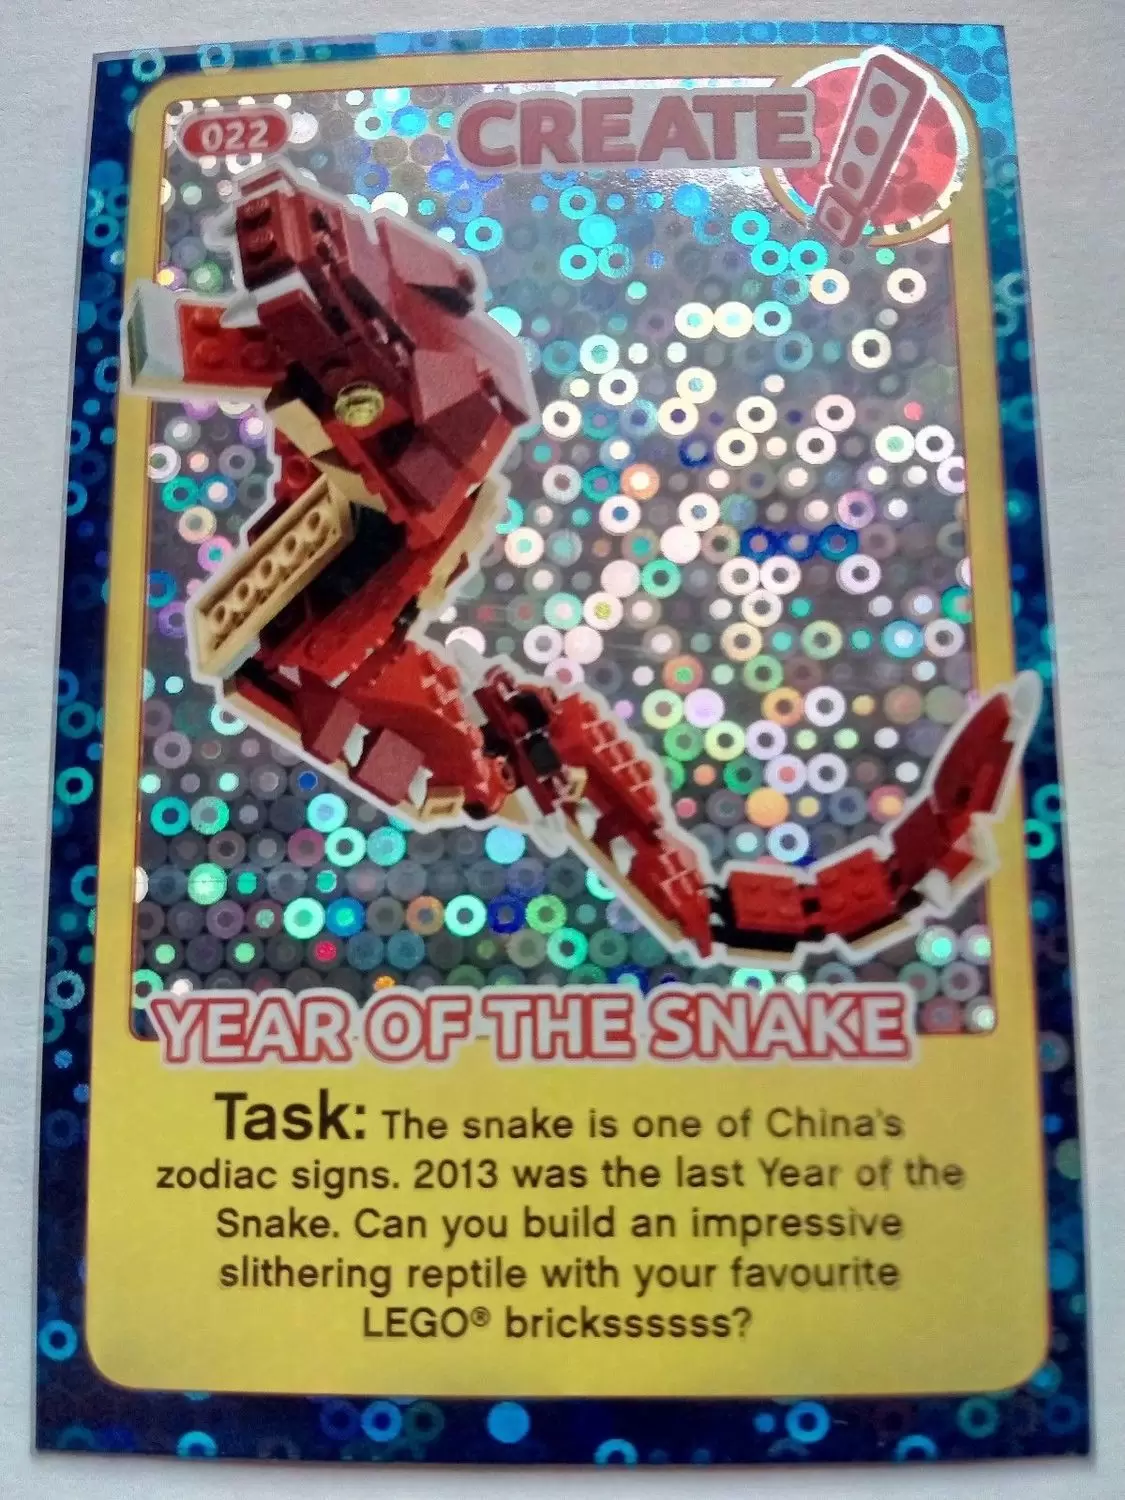 Sainsburys Lego Incredible Inventions 2018 - Year of the snake